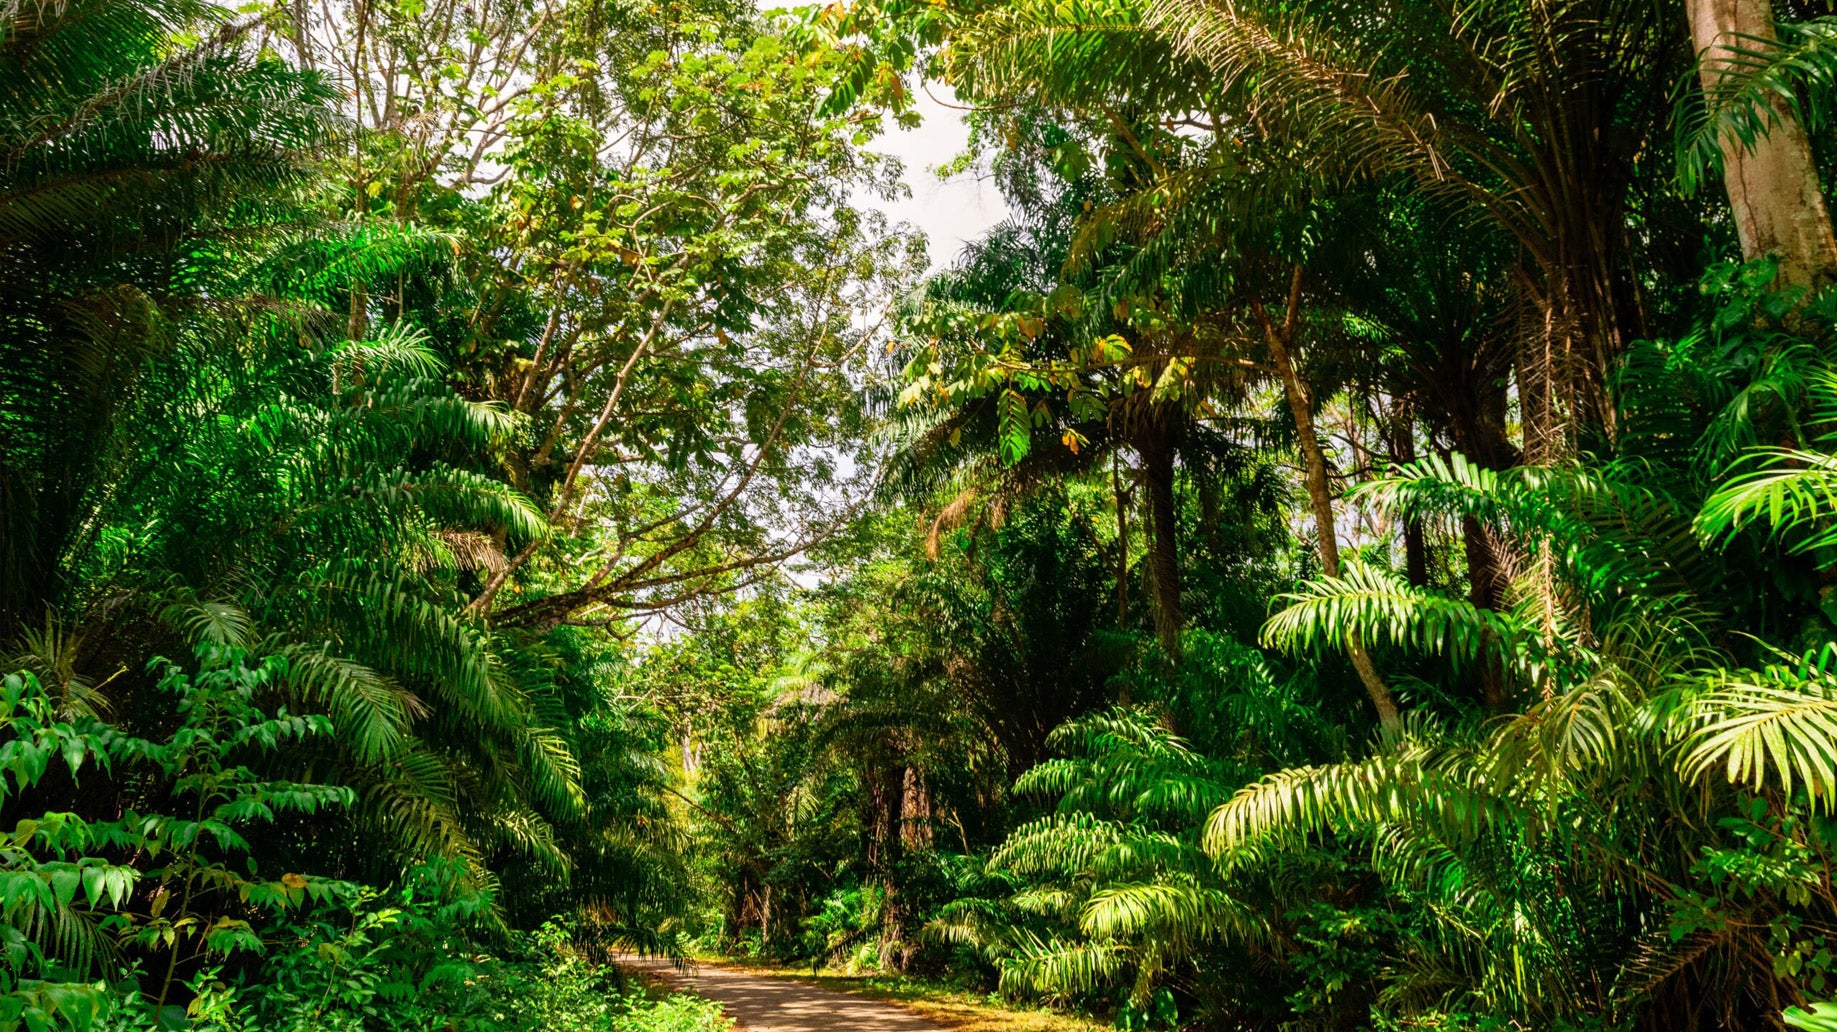 Concrete paved pathway in densely vegetated tropical forest, Chaguaramas Trinidad